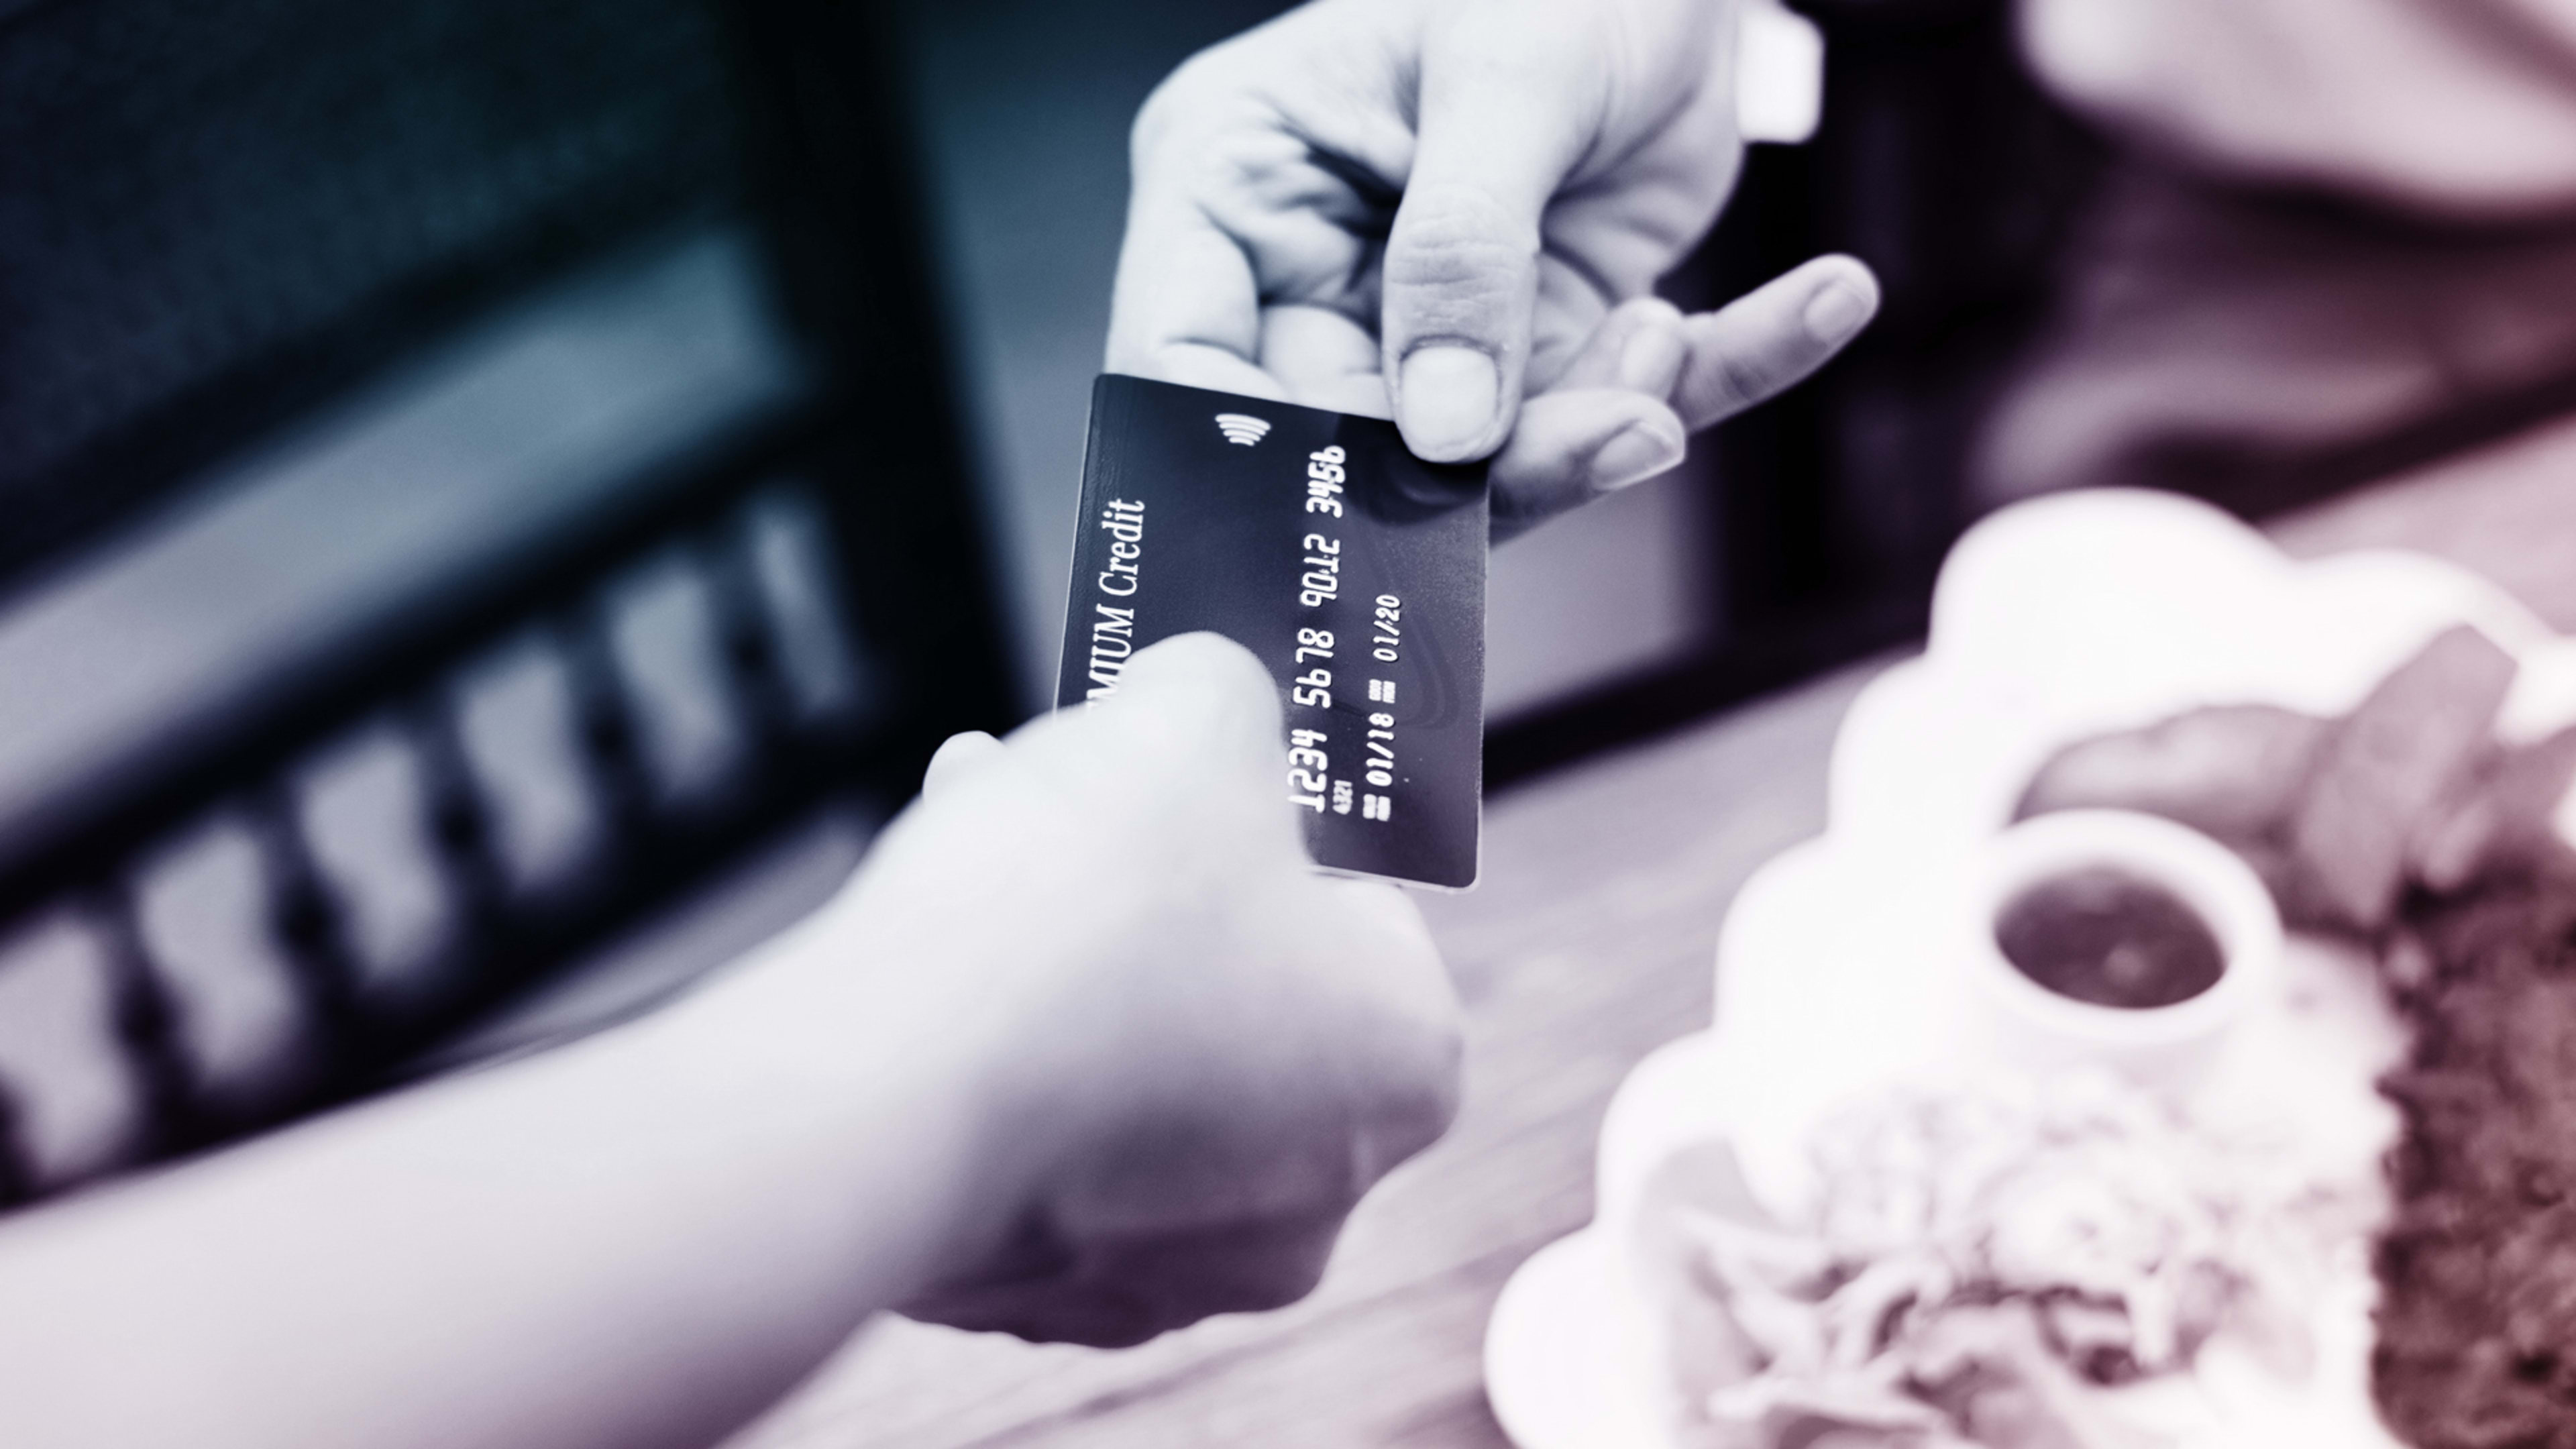 Here’s the growing list of cities that may ban cashless retail stores